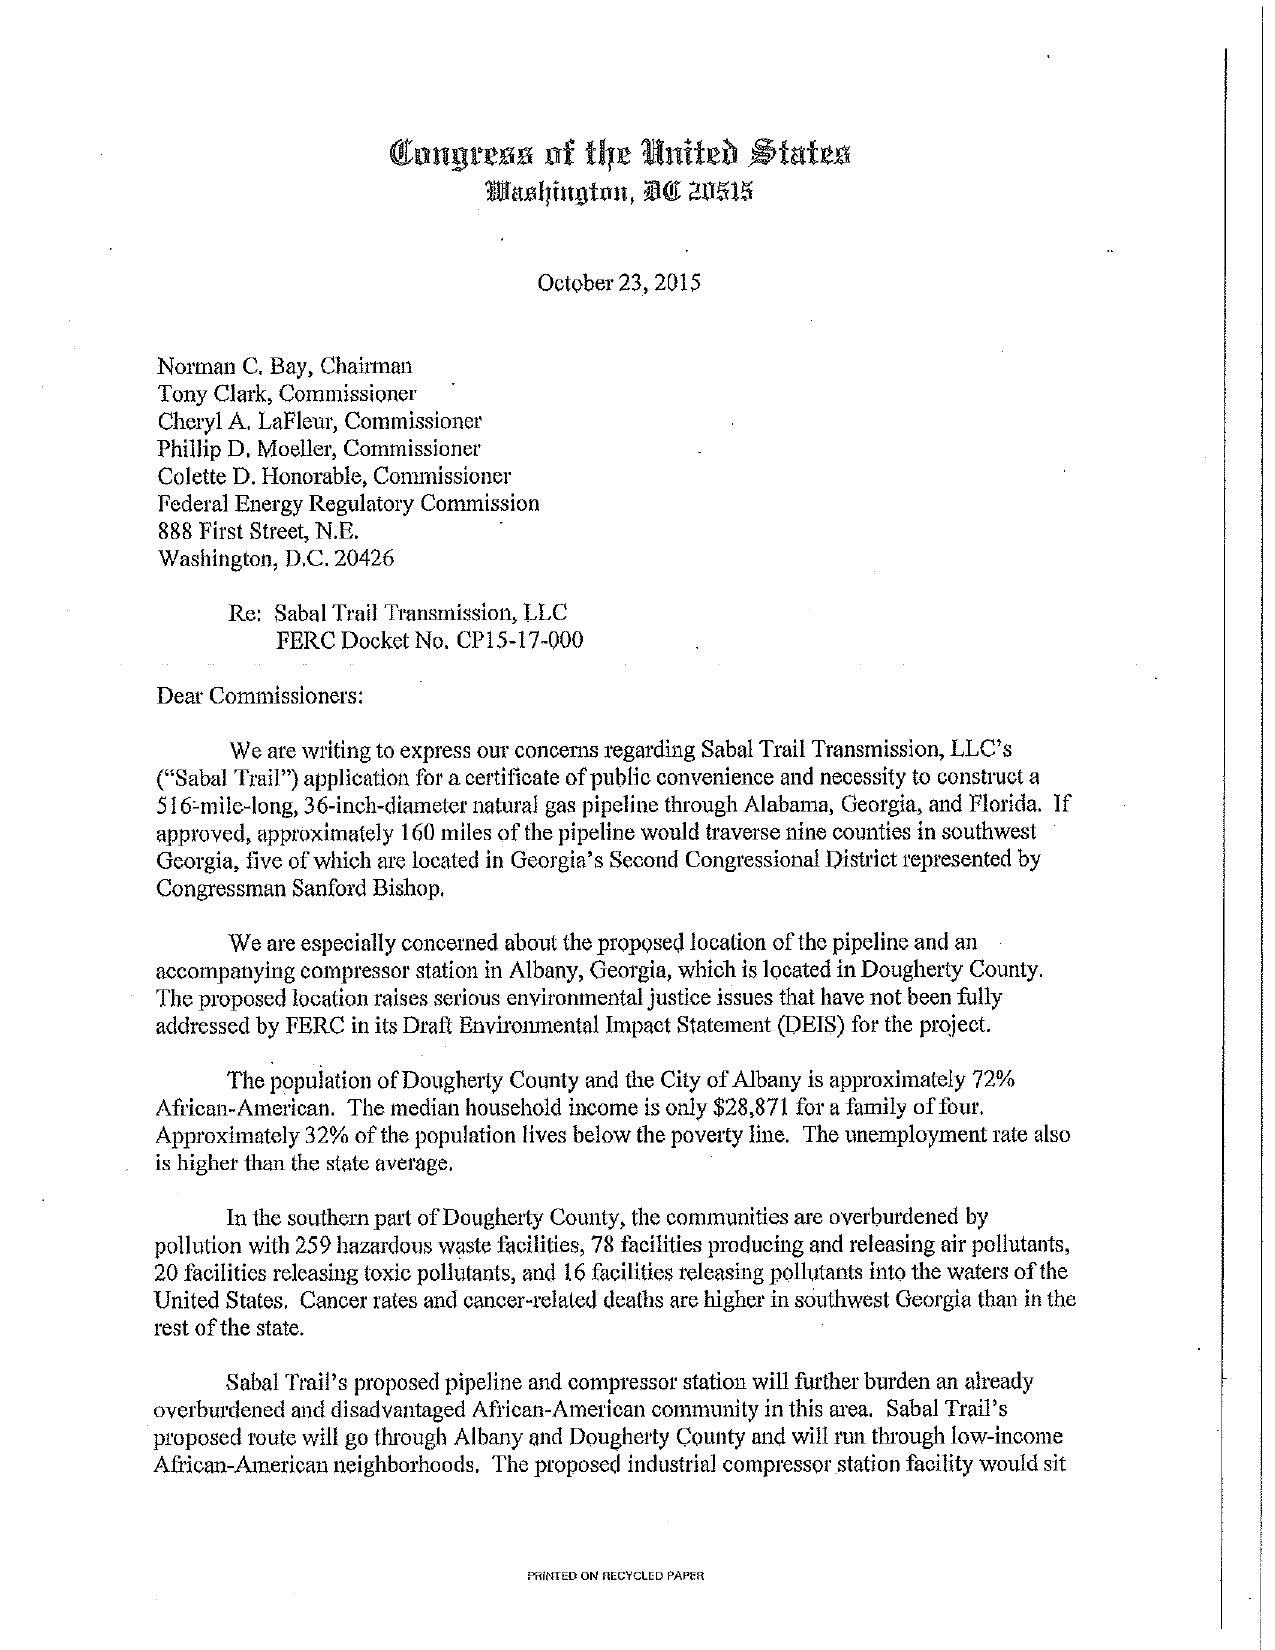 1275x1650 To the FERC Commissioners, in Four Congress members demand Sabal Trail move off of Albany, GA, by Sanford D. Bishop Jr., John Lewis, Henry C. Hank Johnson  Jr., David Scott, for SpectraBusters.org, 23 October 2015